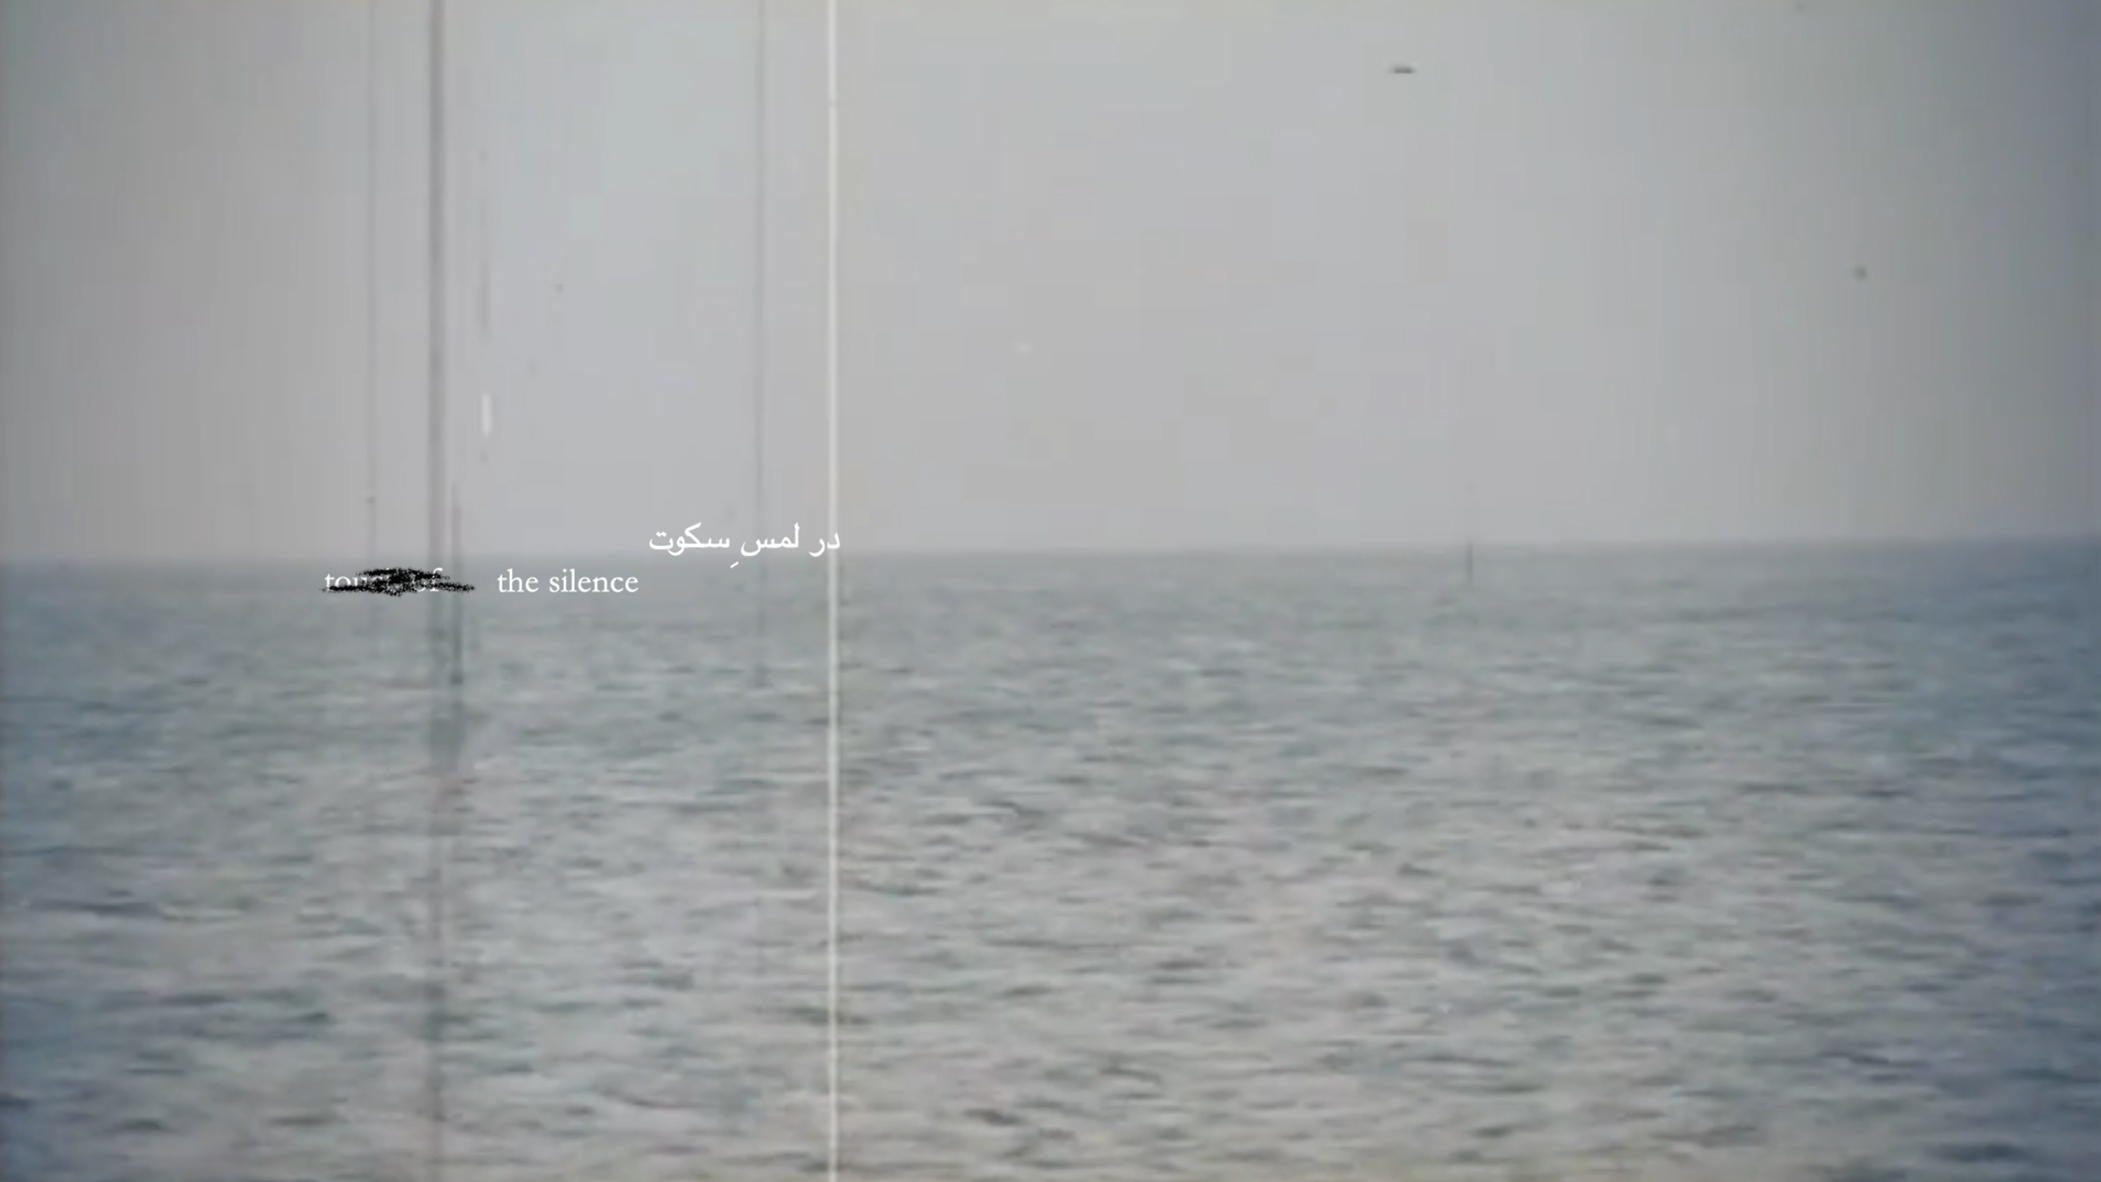 The image shows a serene ocean under a grey sky filling the frame. The horizon line divides the image into two halves, with a white caption that reads 'touch of the silence' followed by Farsi words. The words 'touch of' are partially scratched off.